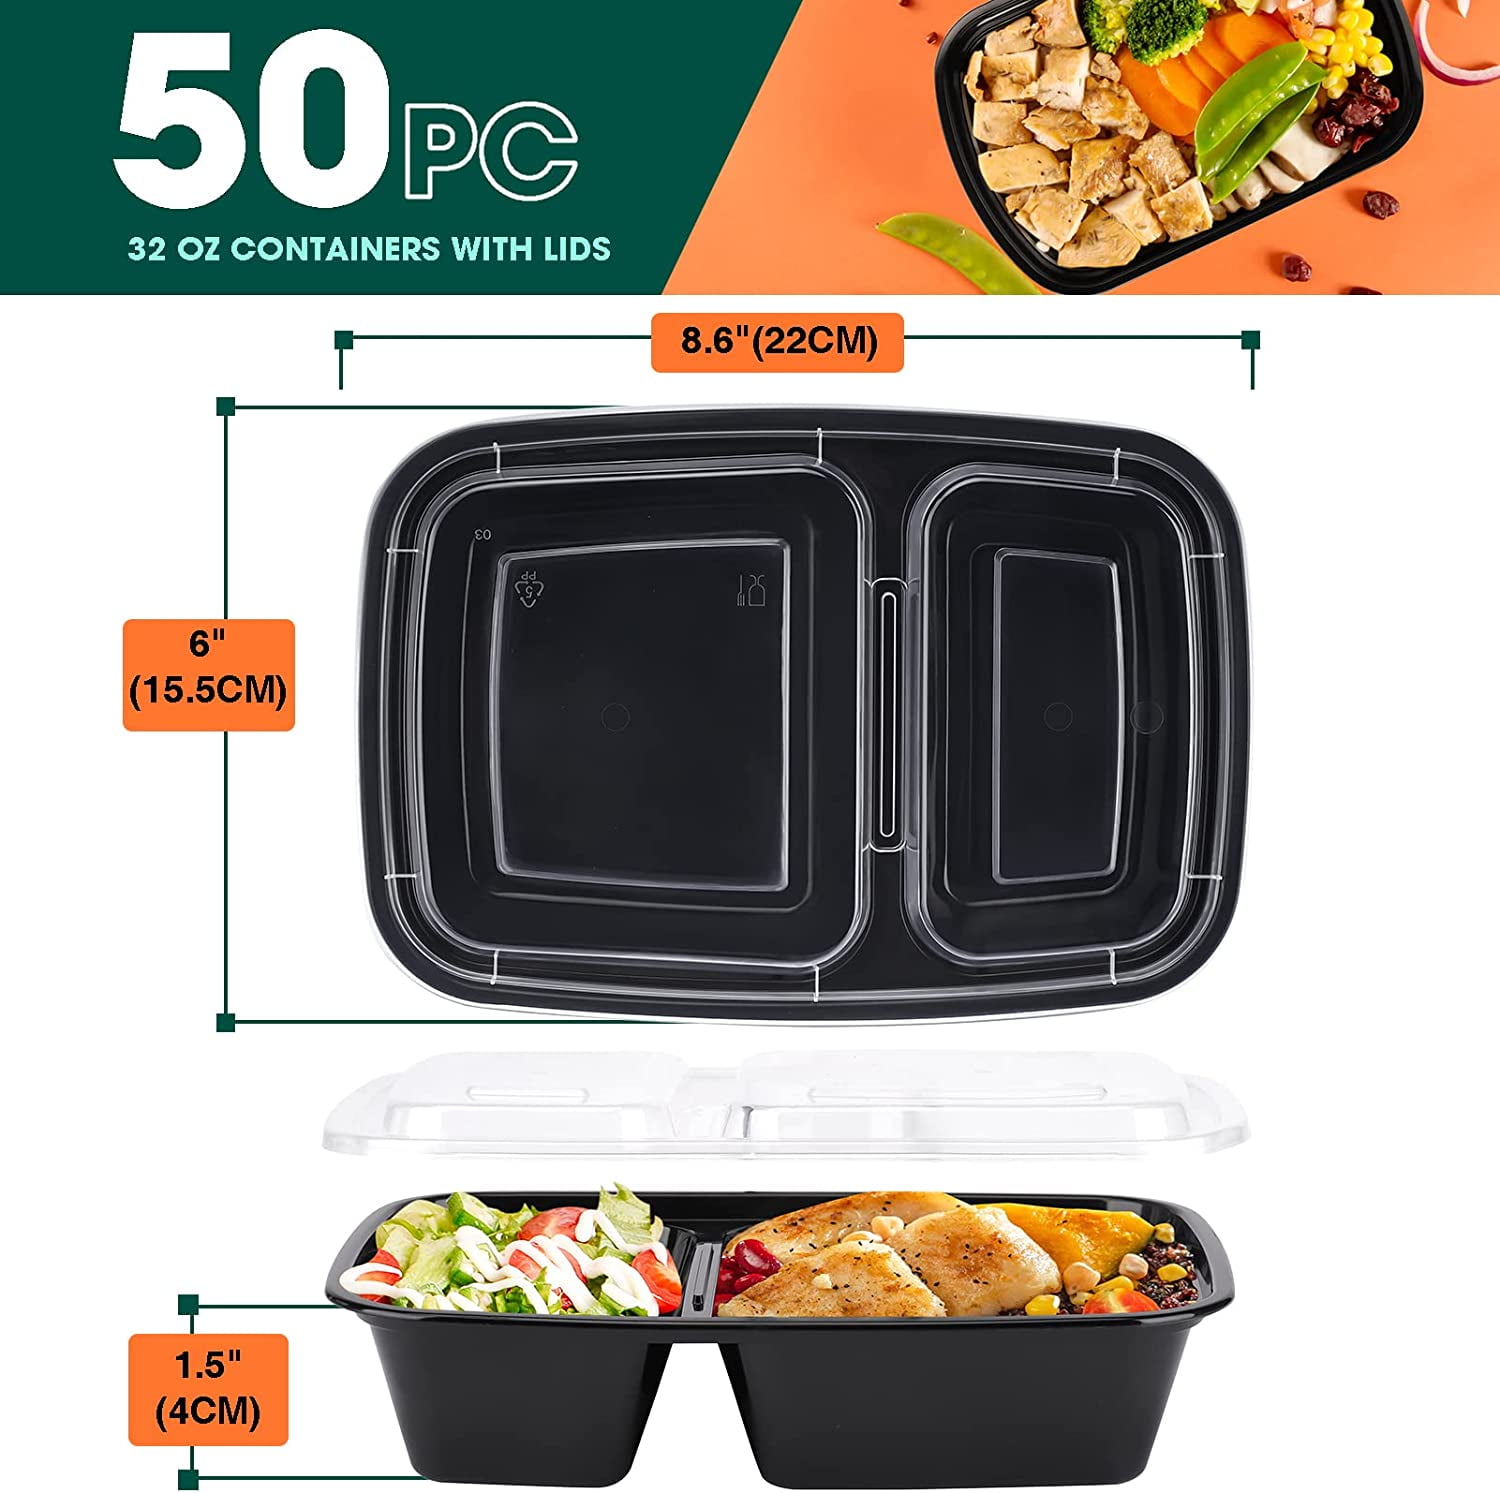 Glotoch Meal Prep Containers Reusable, 50Pack 32oz Plastic Food Prep  Storage Containers with Lids,BPA Free,Microwave, Dishwasher Safe Disposable  To Go